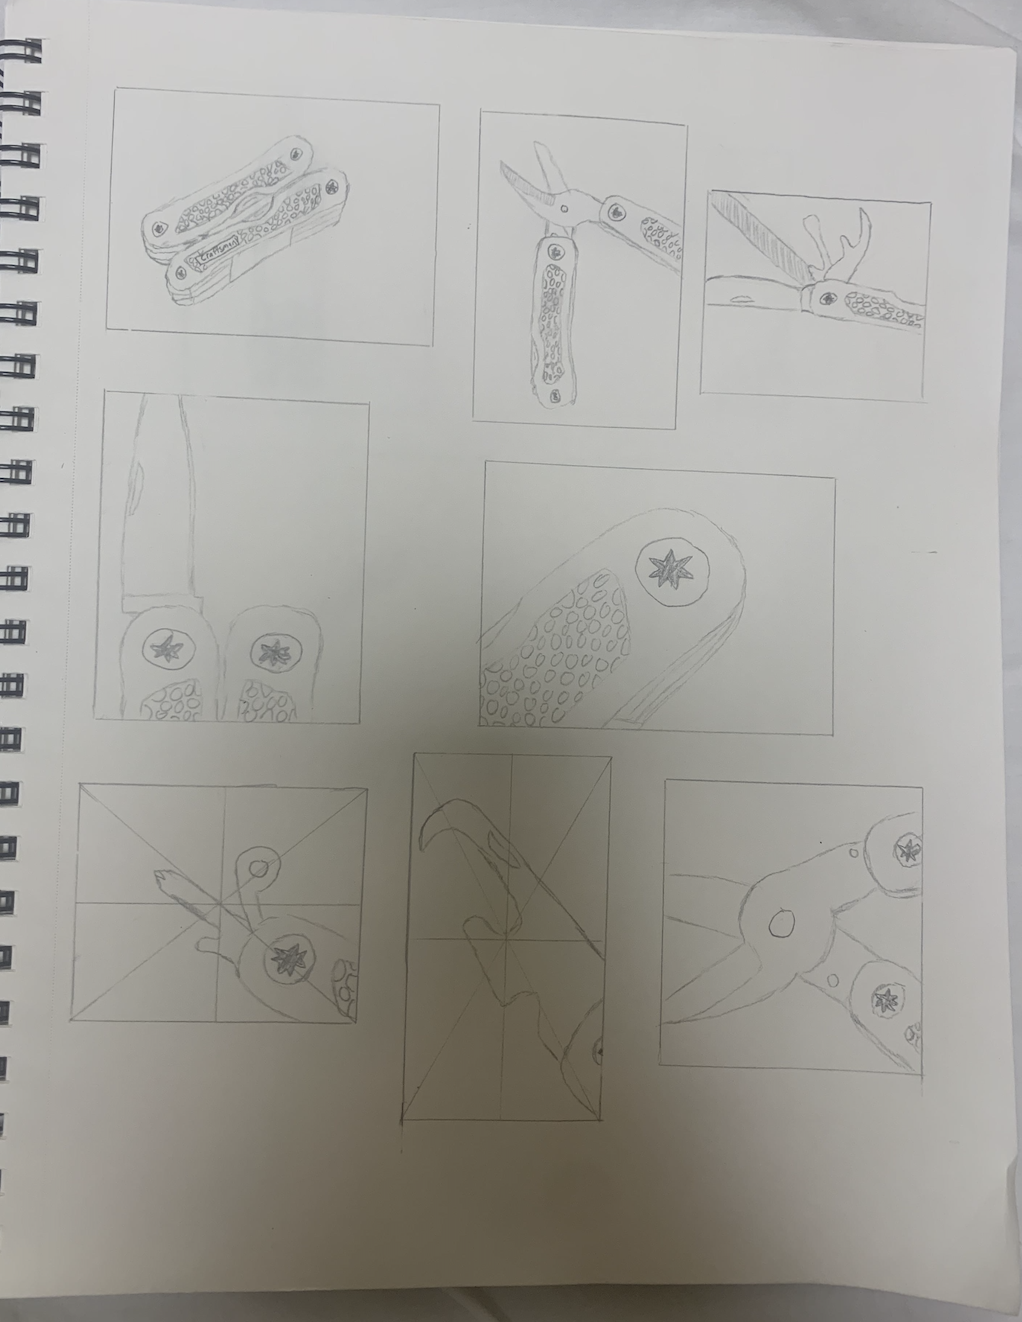 Thumbnail Sketches and Grid Transposition